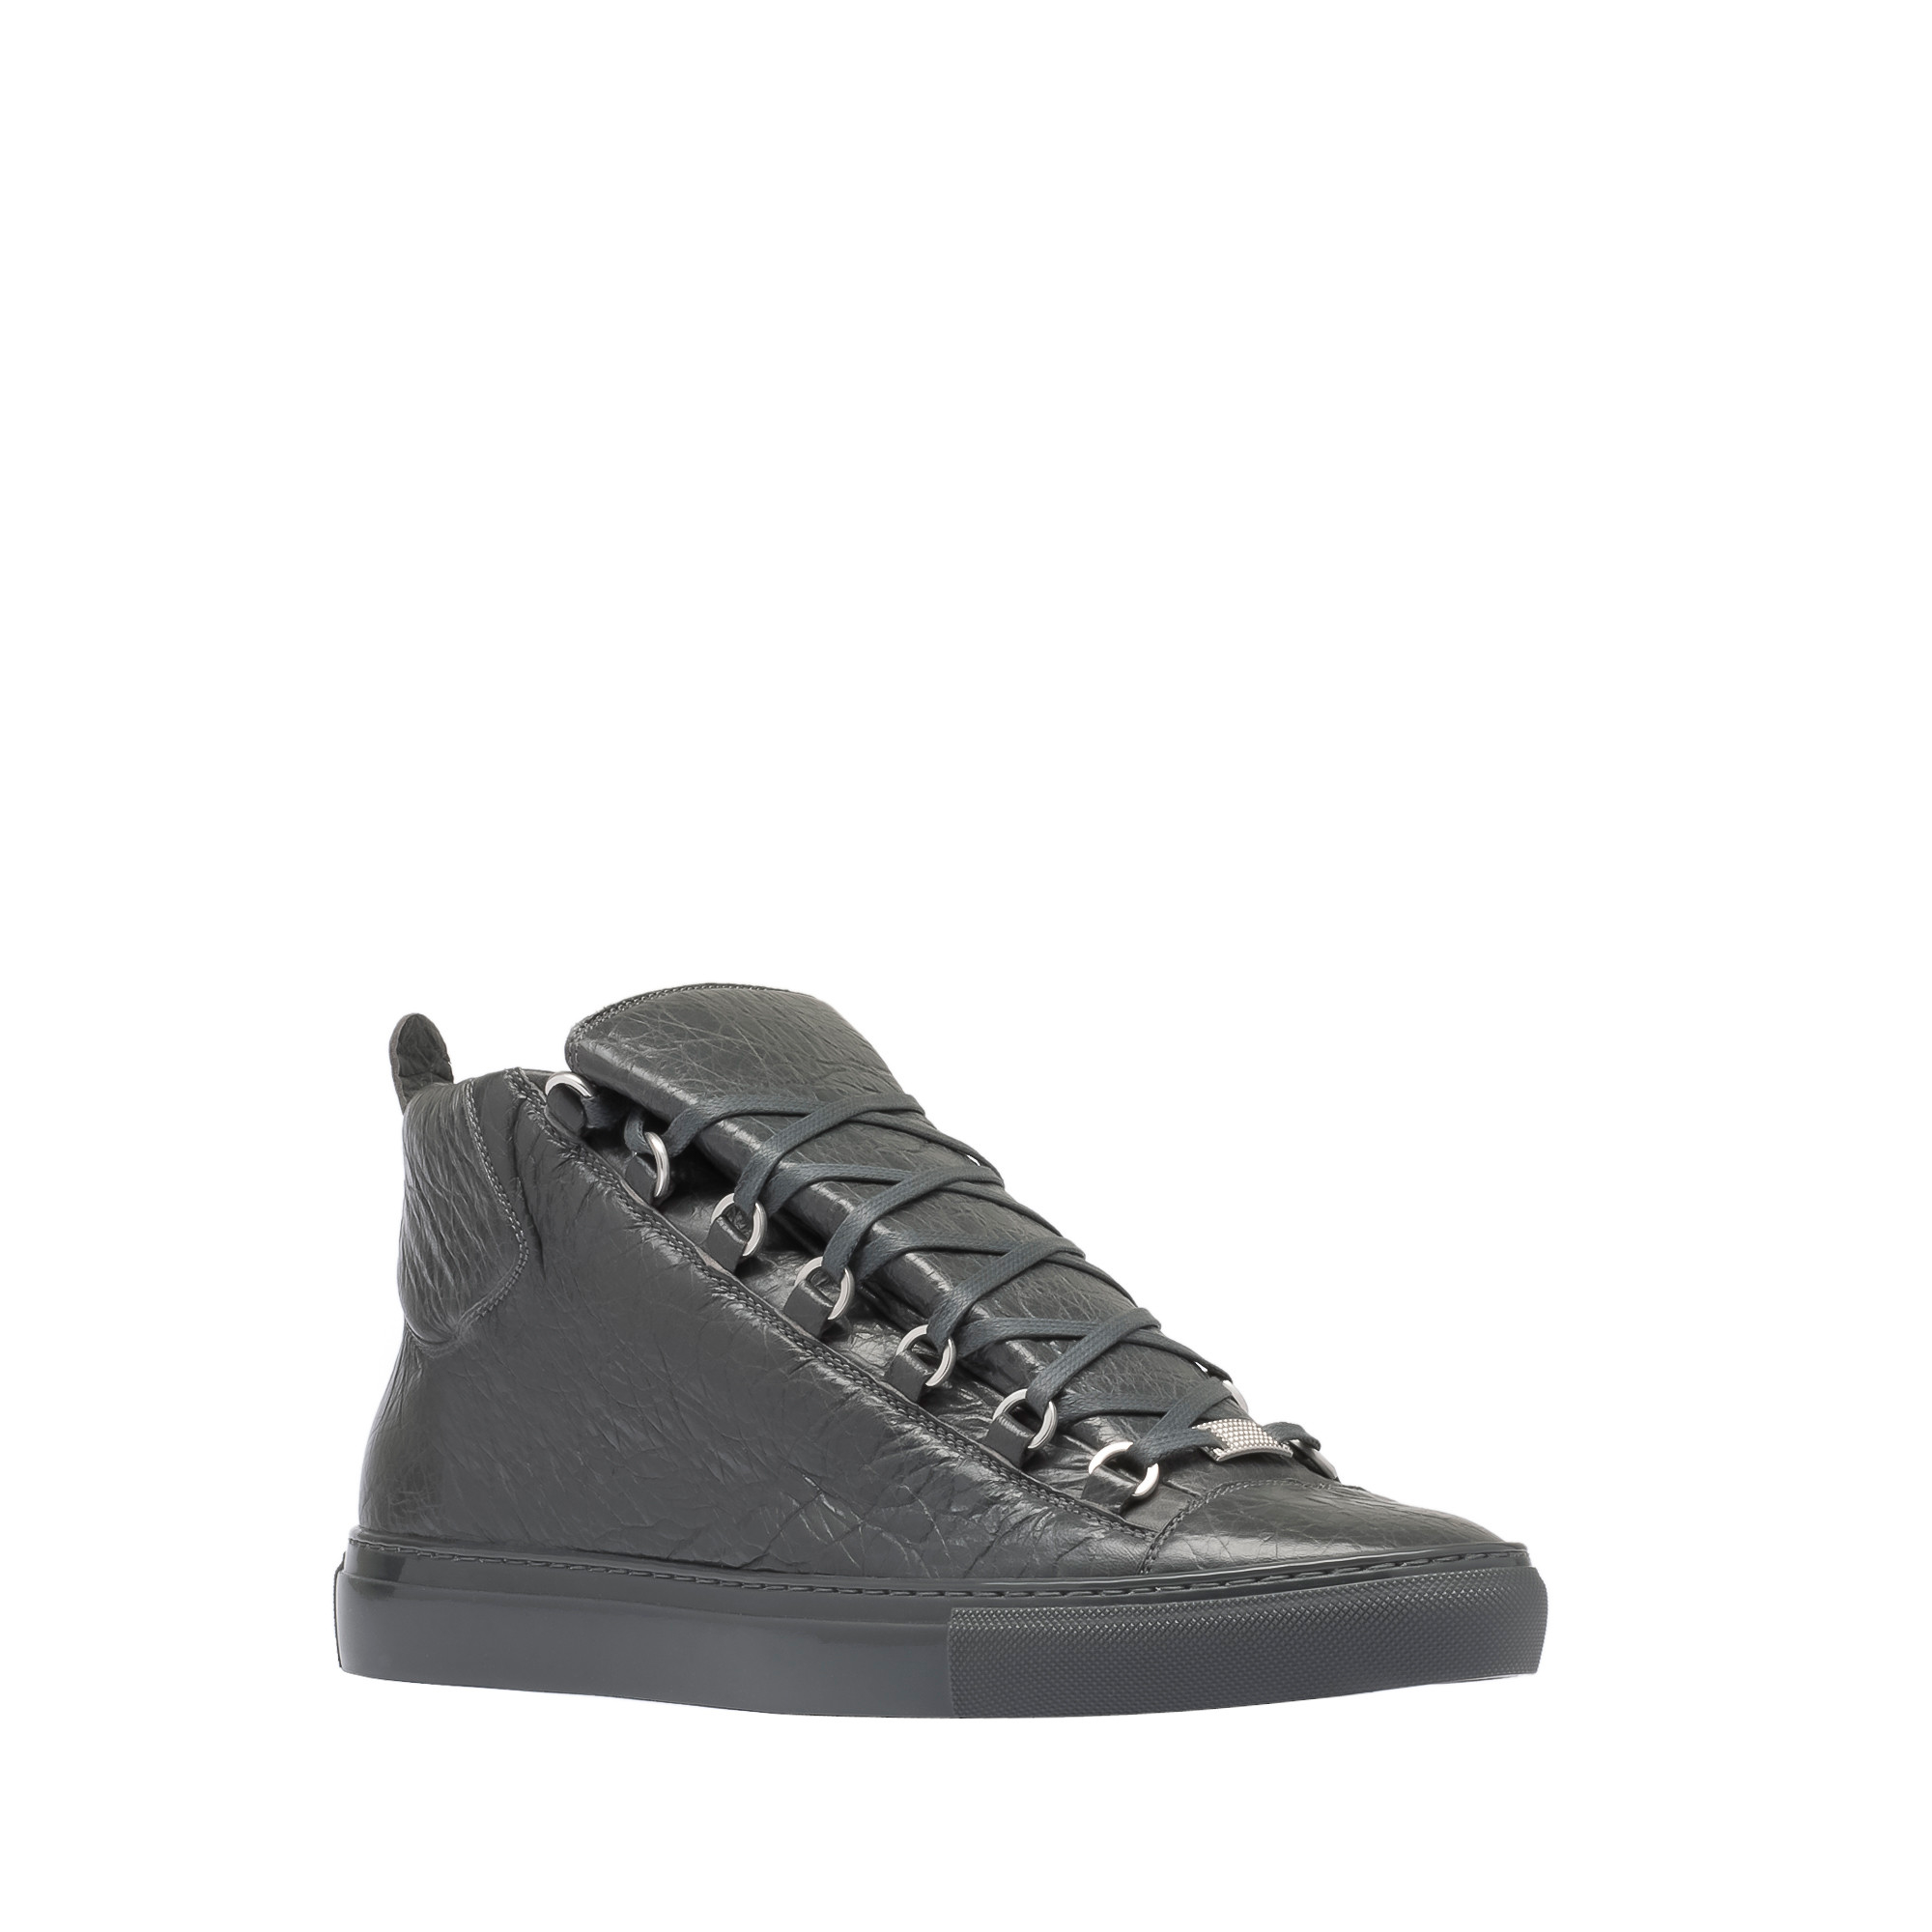 Balenciaga Arena Matte Leather High-Top Sneakers in Gray | Lyst